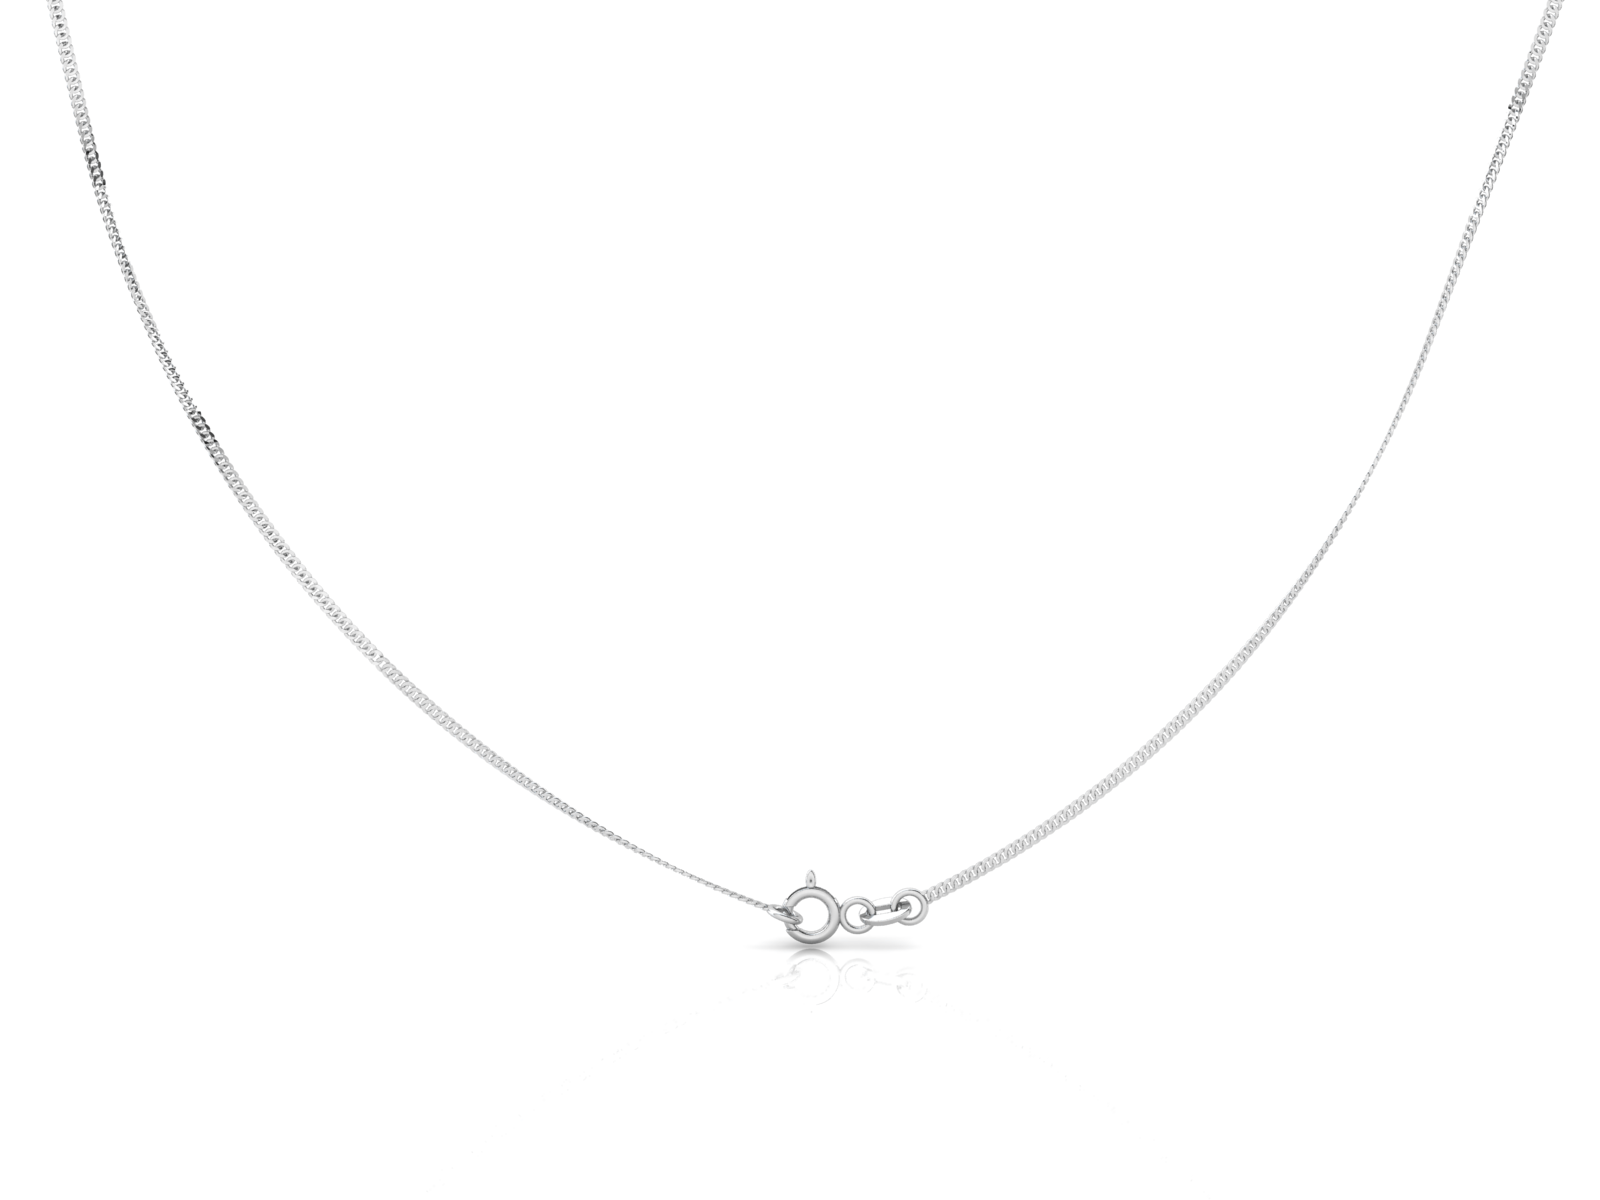 Curb (1.6mm) Sterling Silver Chain, 18